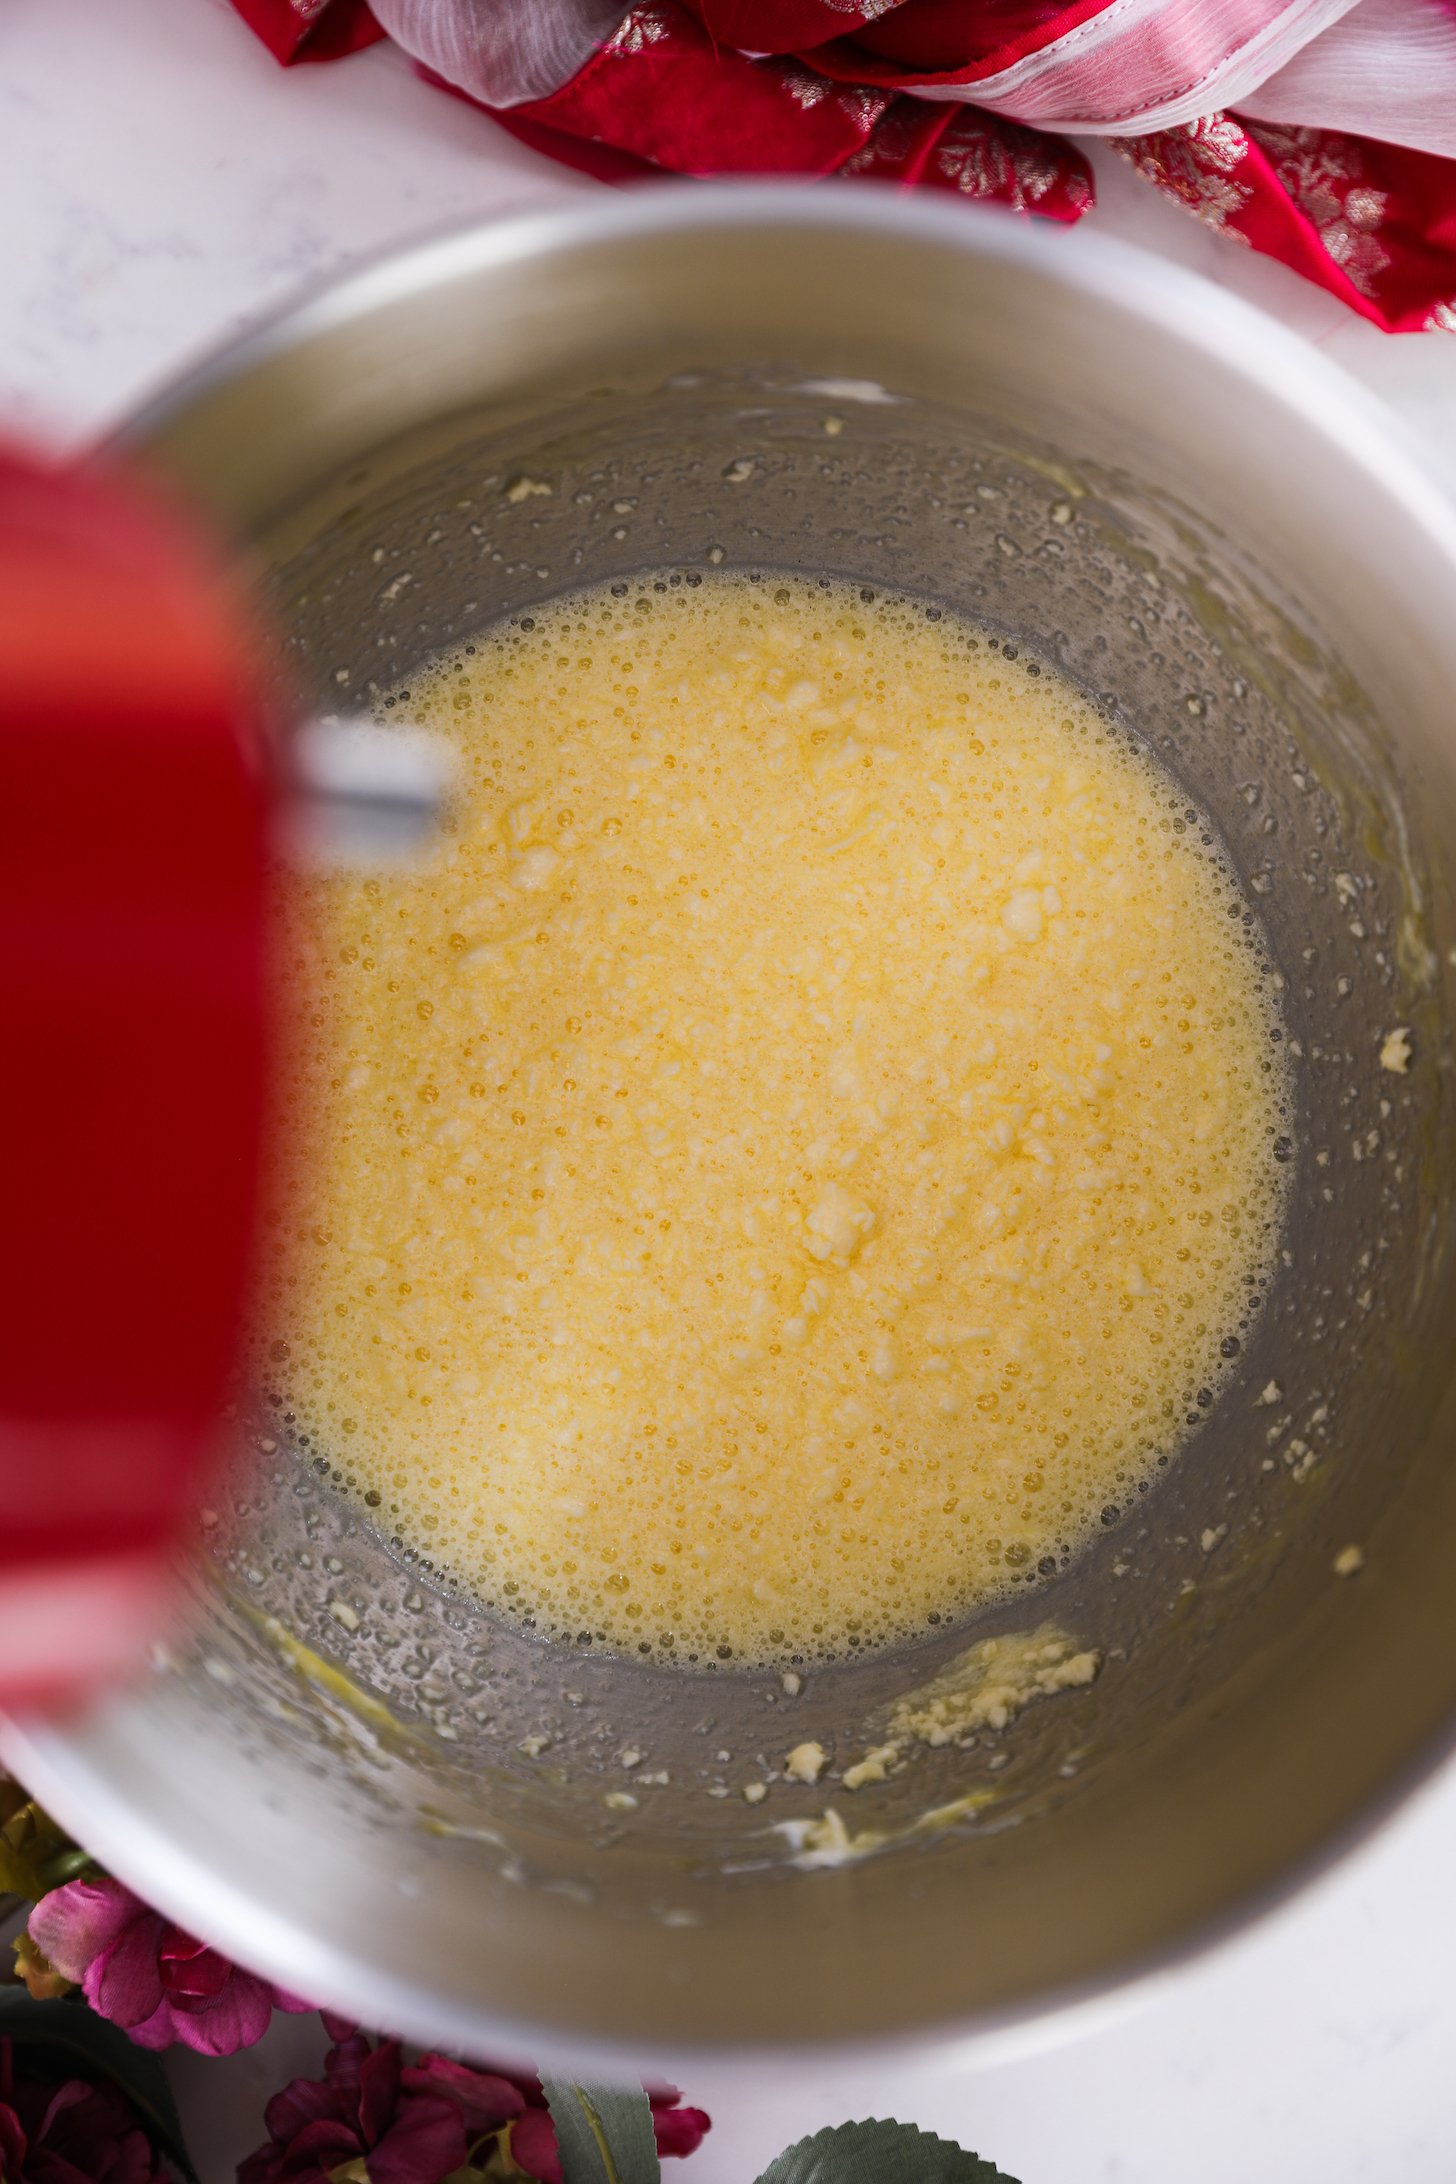 An overhead shot captures a stand mixer bowl filled with a lumpy and flowing yellow mixture.